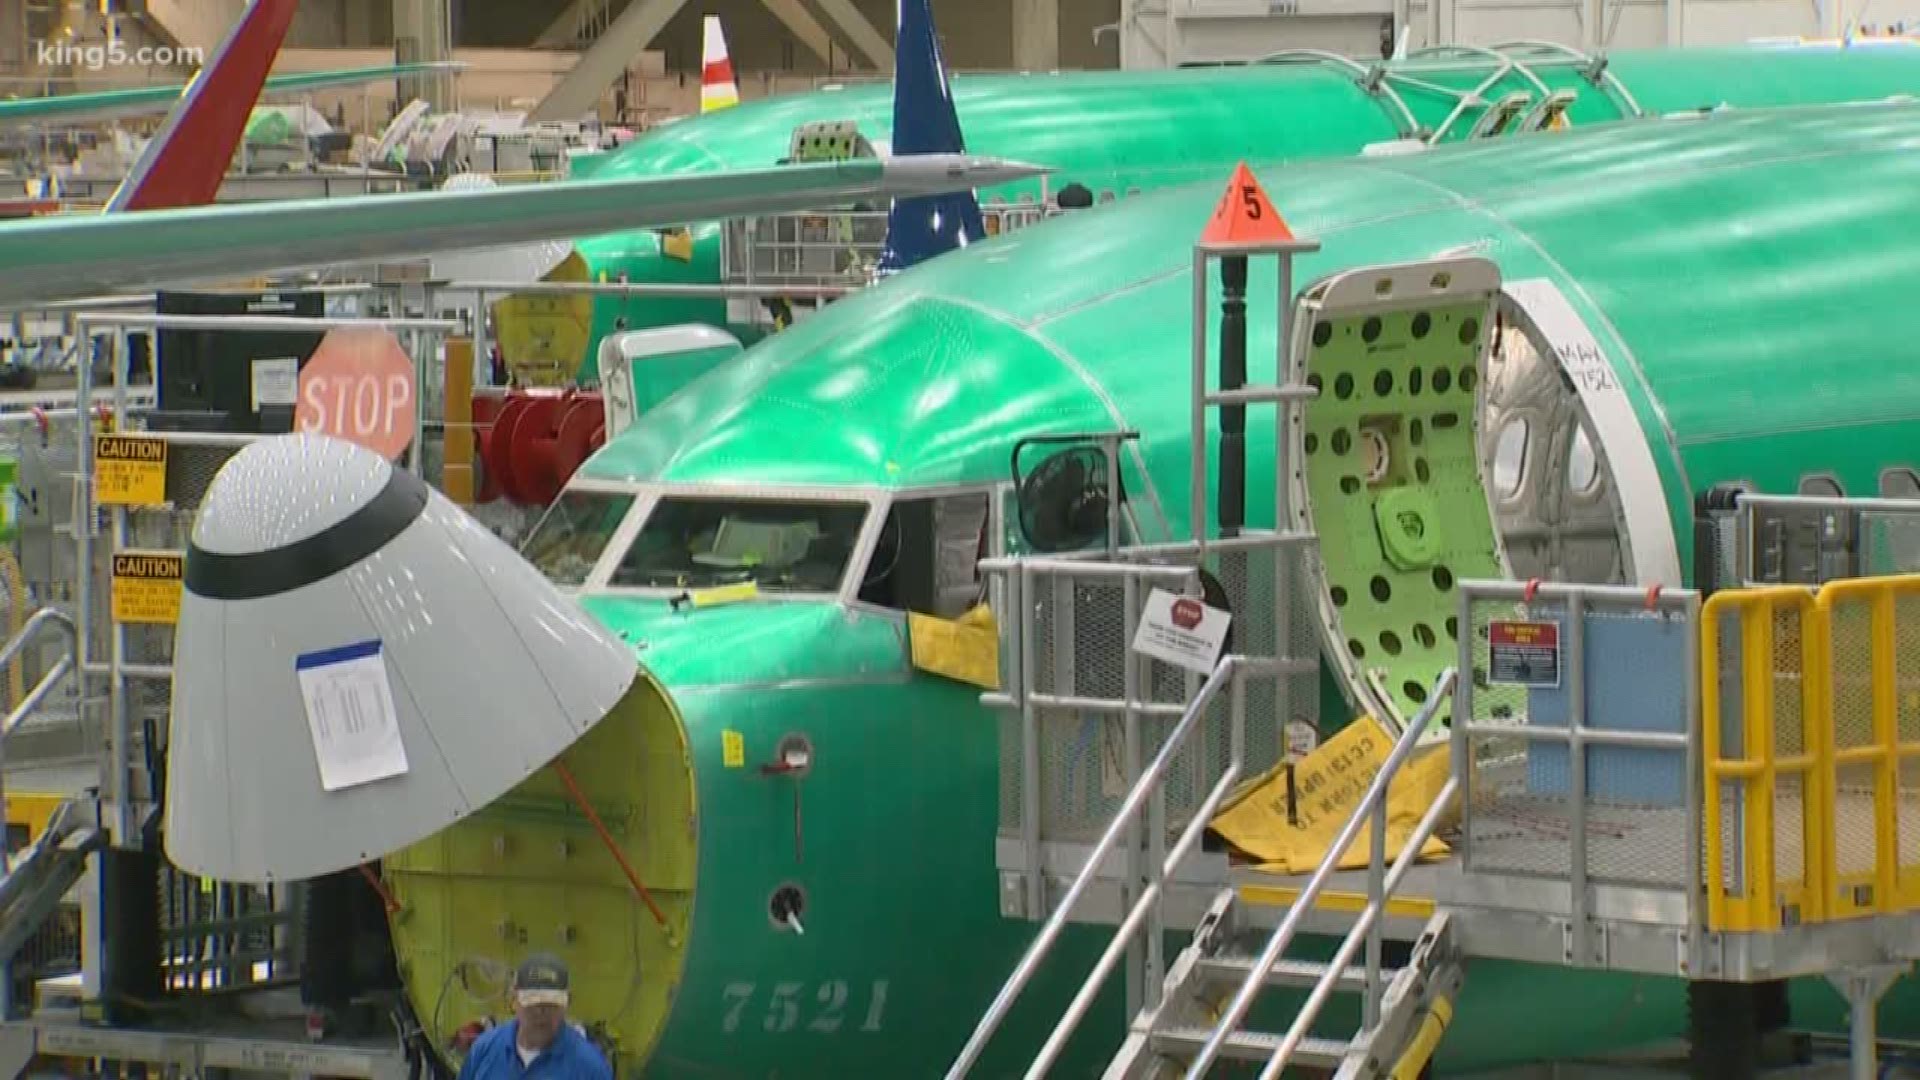 As Boeing executives apologize for two crashes involving a flight control system aboard brand new 737 MAX jets, the grounding of this critical jet continues. KING 5 aviation expert Glenn Farley reports.